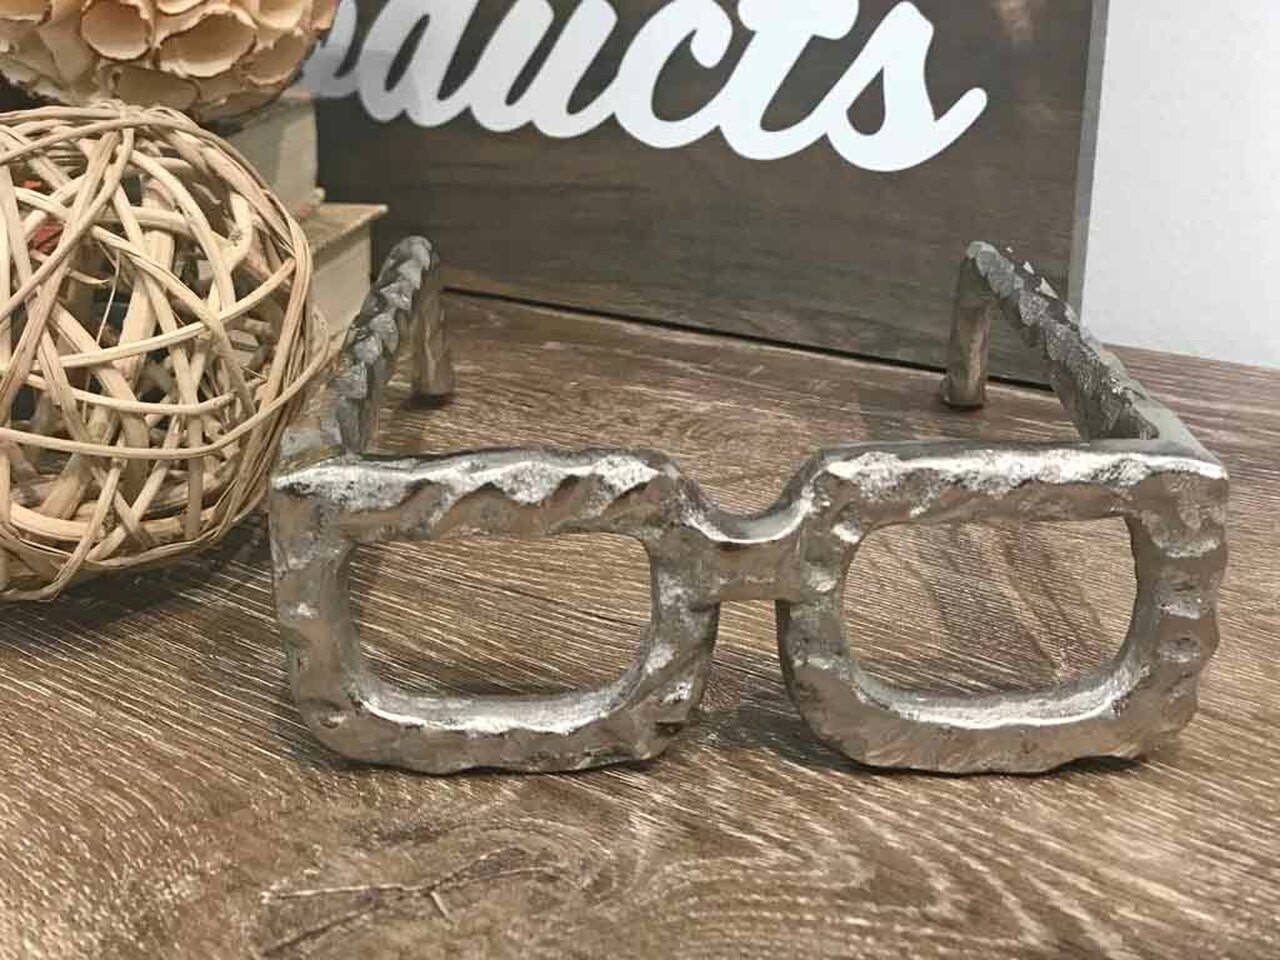 Raw Silver Textured Square Glasses Sculpture